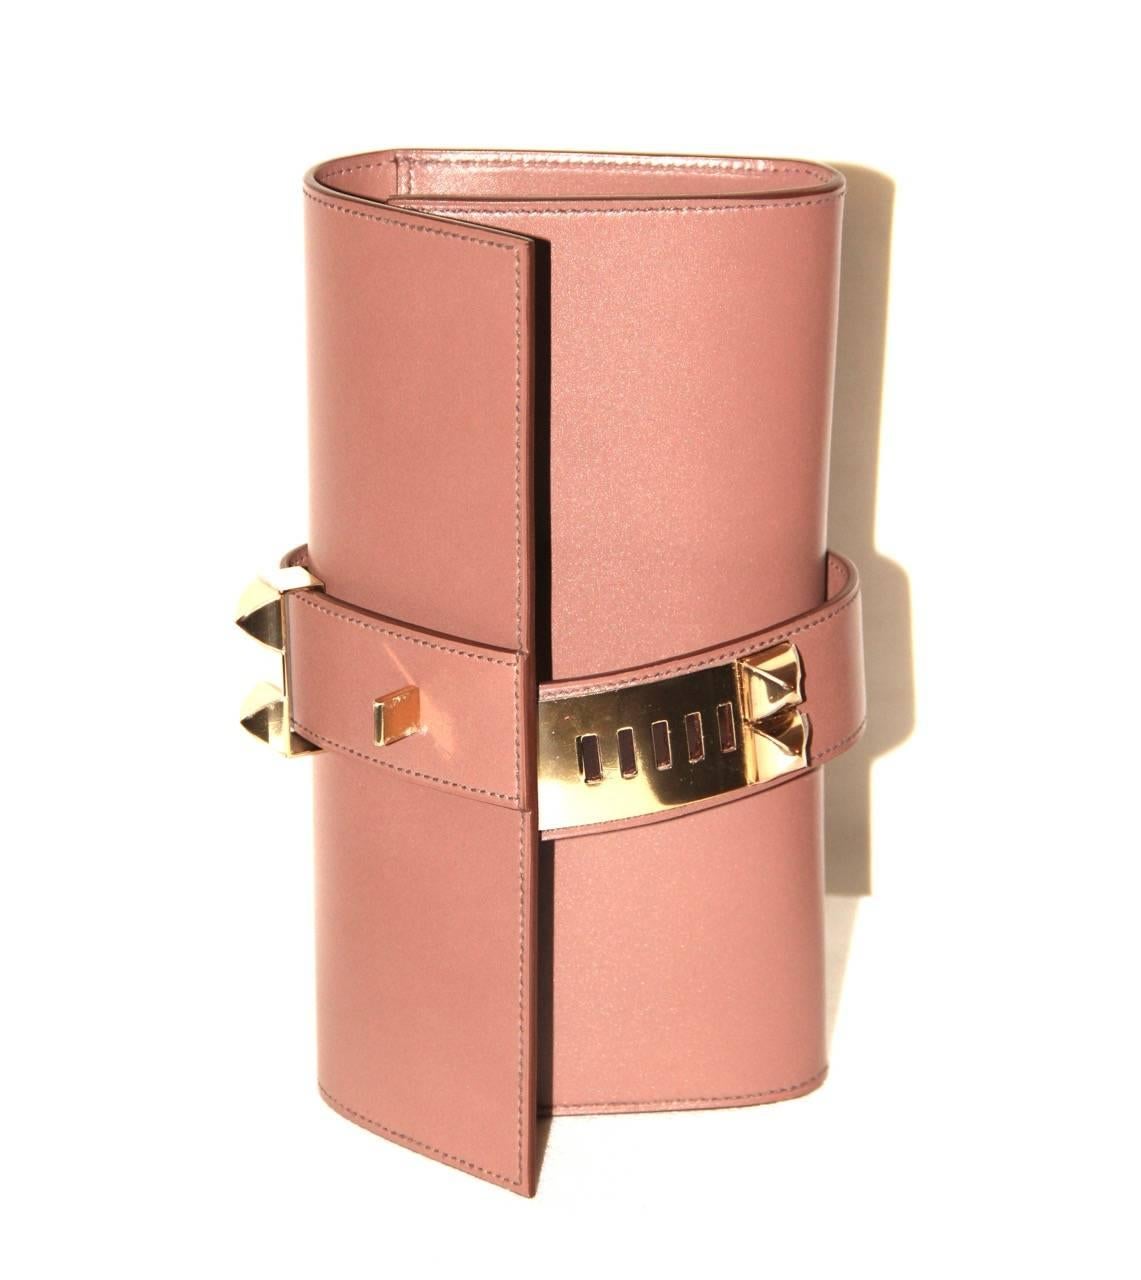 Signature style of Hermes. Sleek lines. Statement clutch  

Collection: 2014
Leather: Swift
Color: Rose Wood
Hardware: Pink gold-tone
Measurements: Length 23 cm x Height 12 cm x Width 4 cm 
Condition: Never worn
Come with: Dust bag, Hermes original